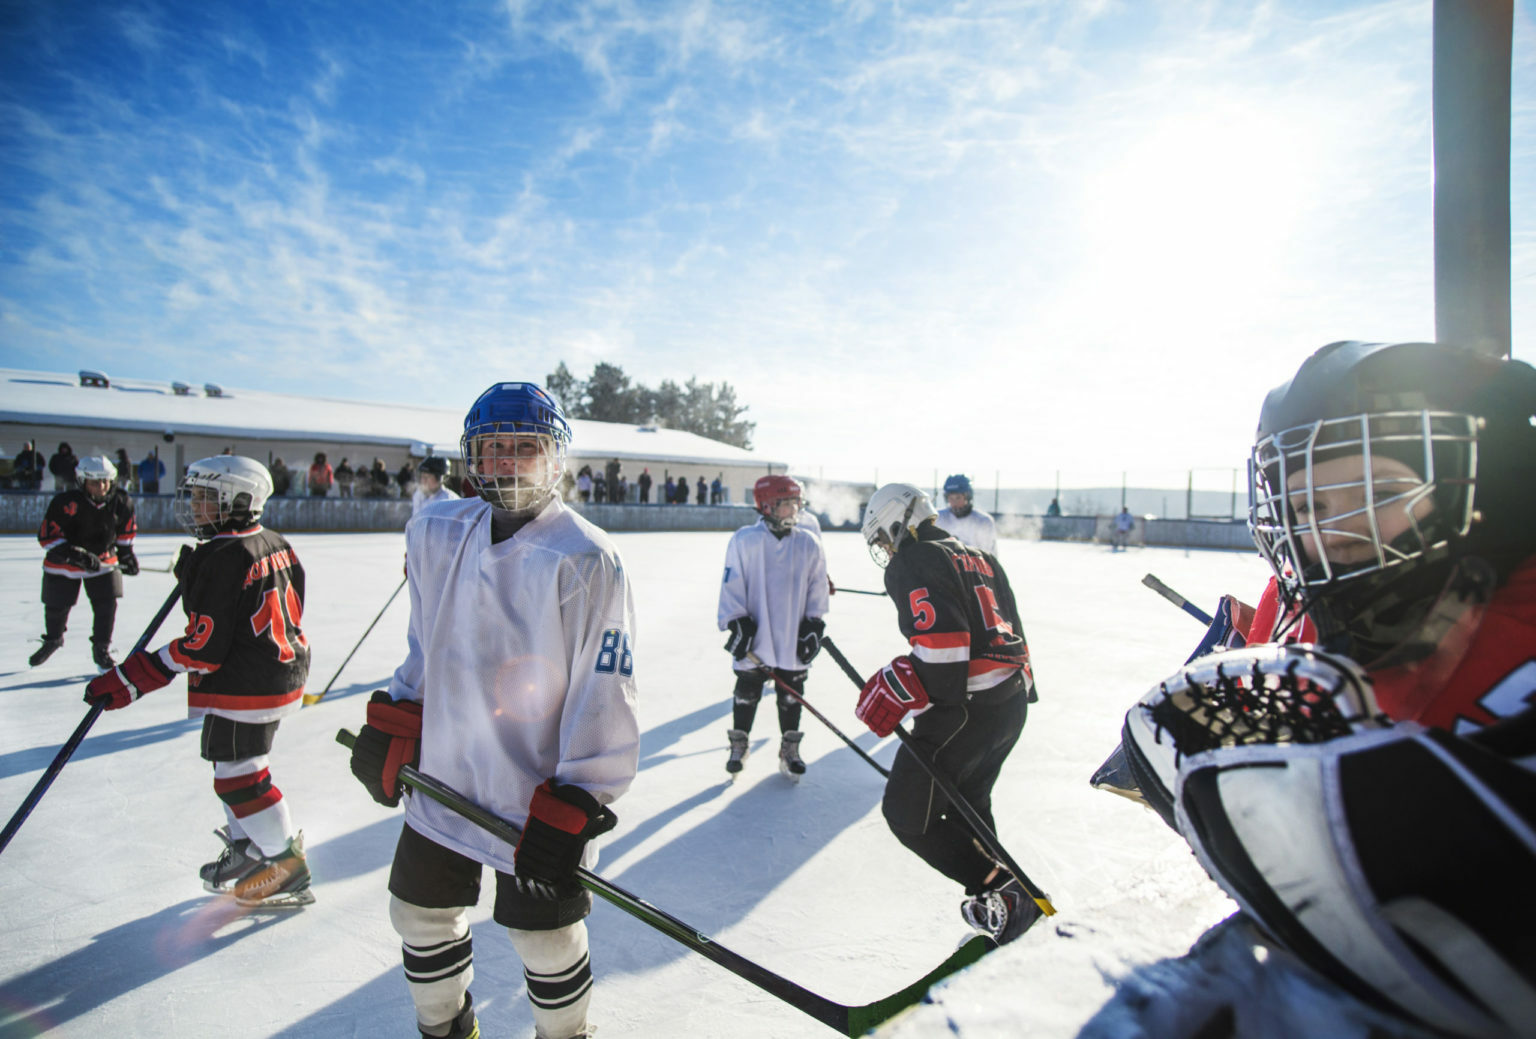 Players Playing Ice Hockey On Sunny Day